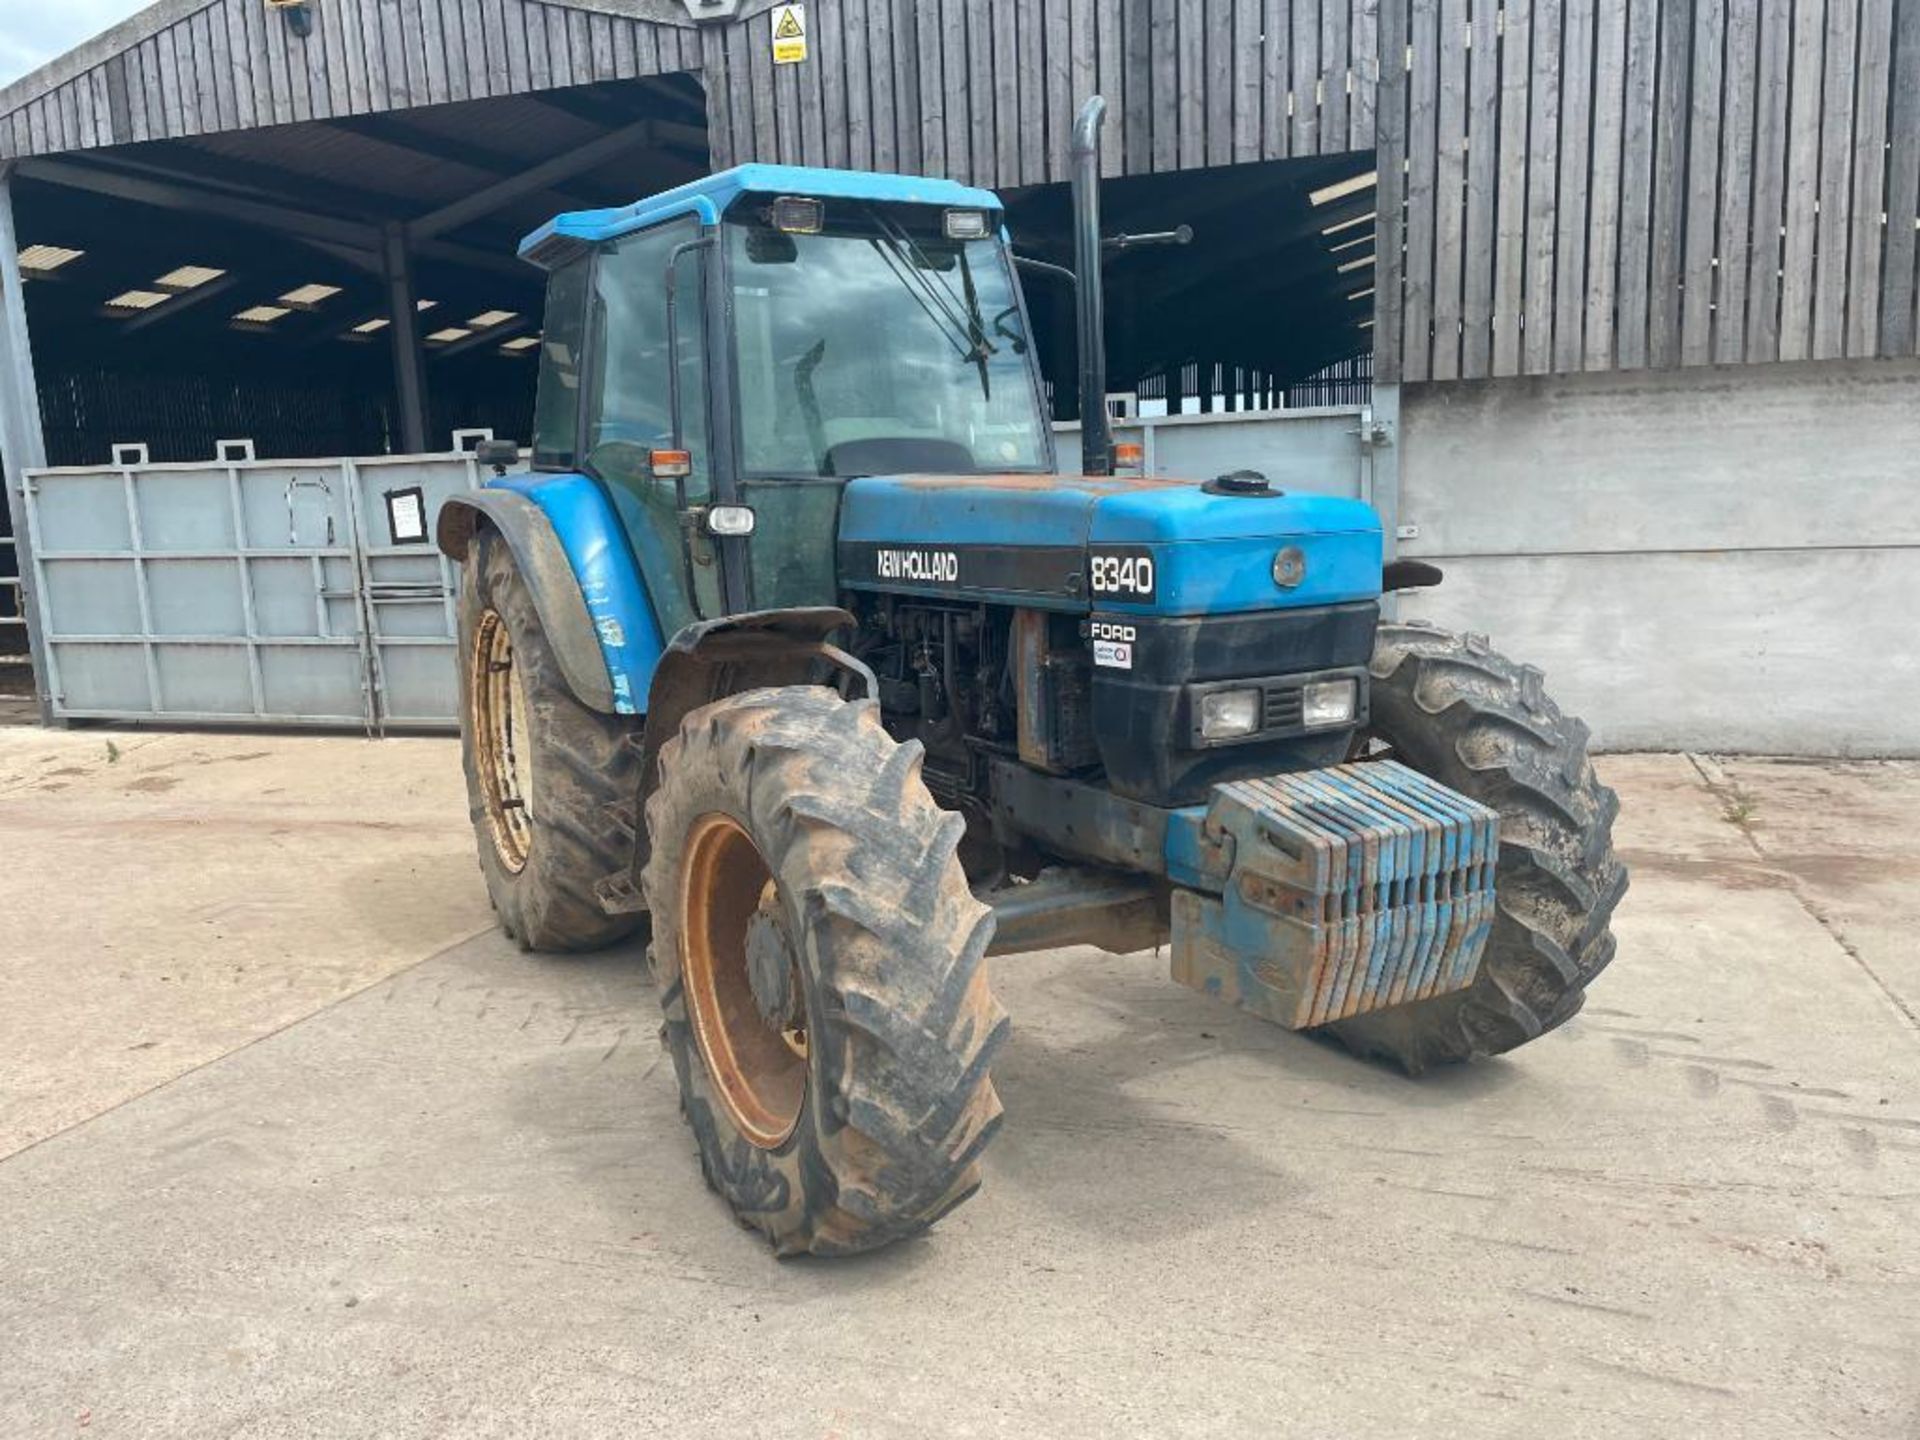 1997 New Holland 8340 4wd tractor with 2 manual spools on 14.9R28 front and 18.4R38 rear wheels and - Image 6 of 22